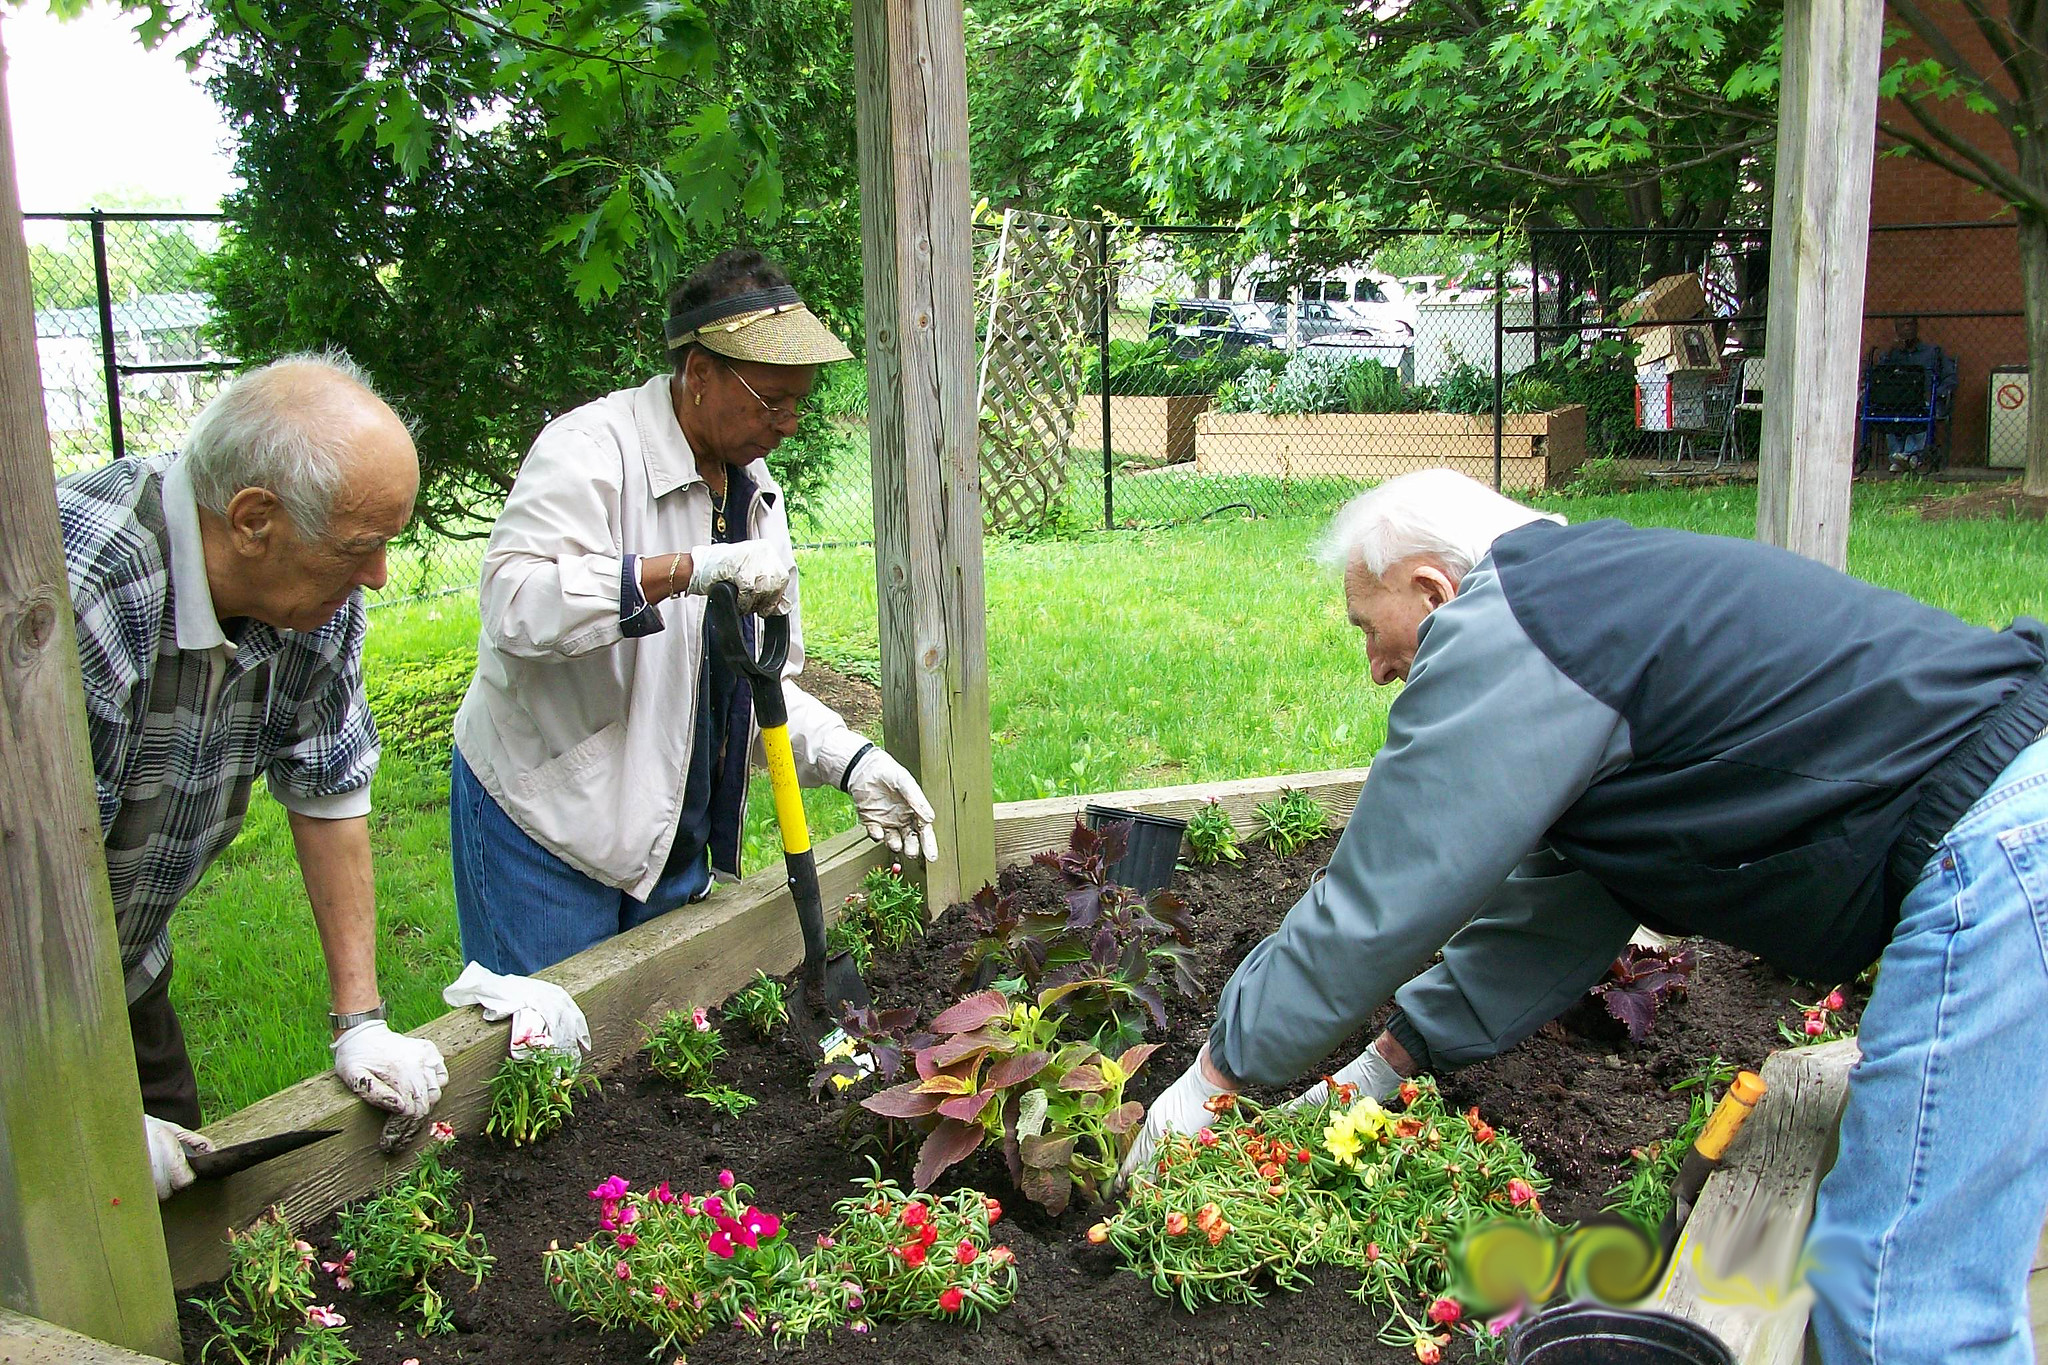 How to keep gardening as you age